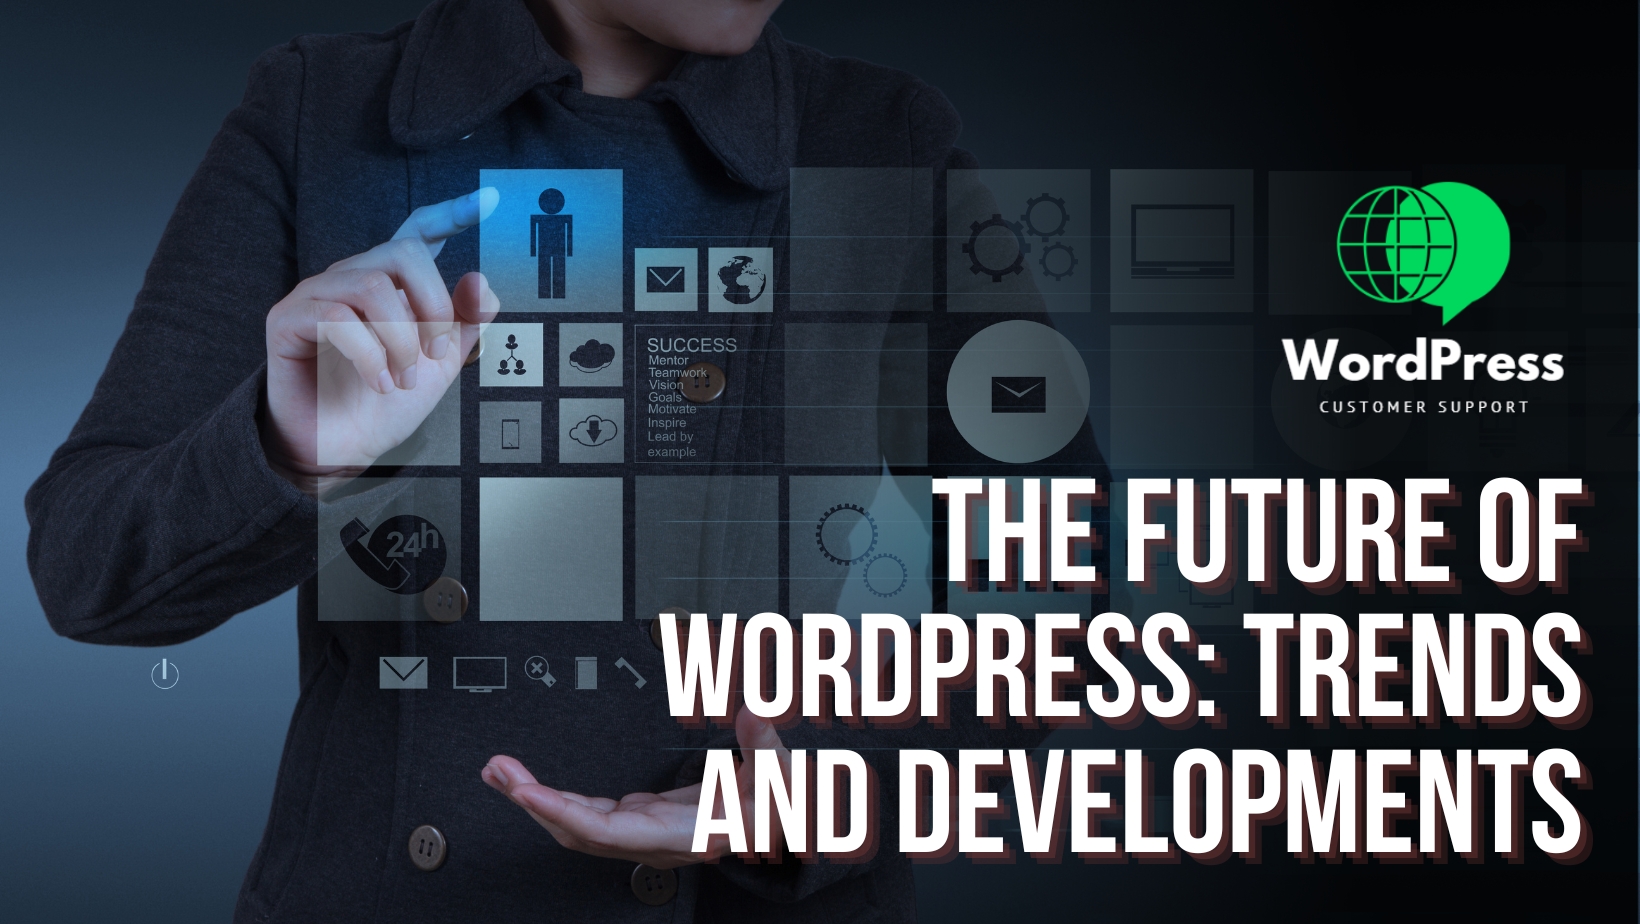 The Future of WordPress: Trends and Developments